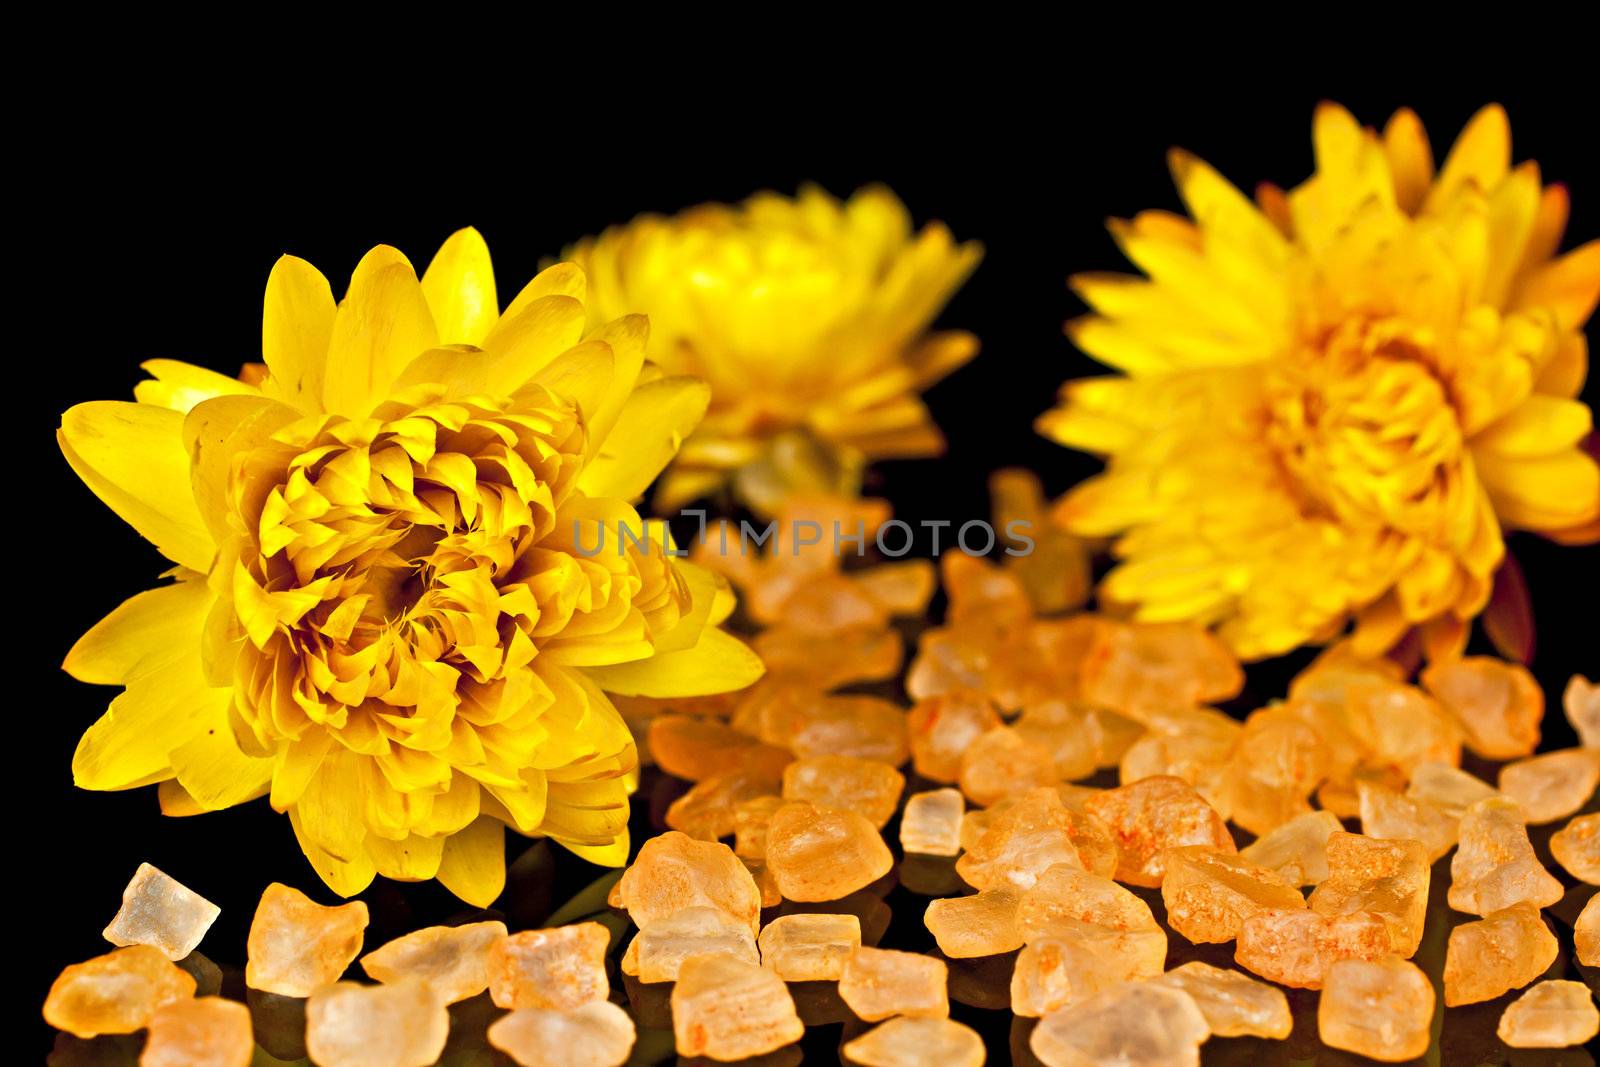 Dry yellow flowers with a bath salt on a black background mirror.
